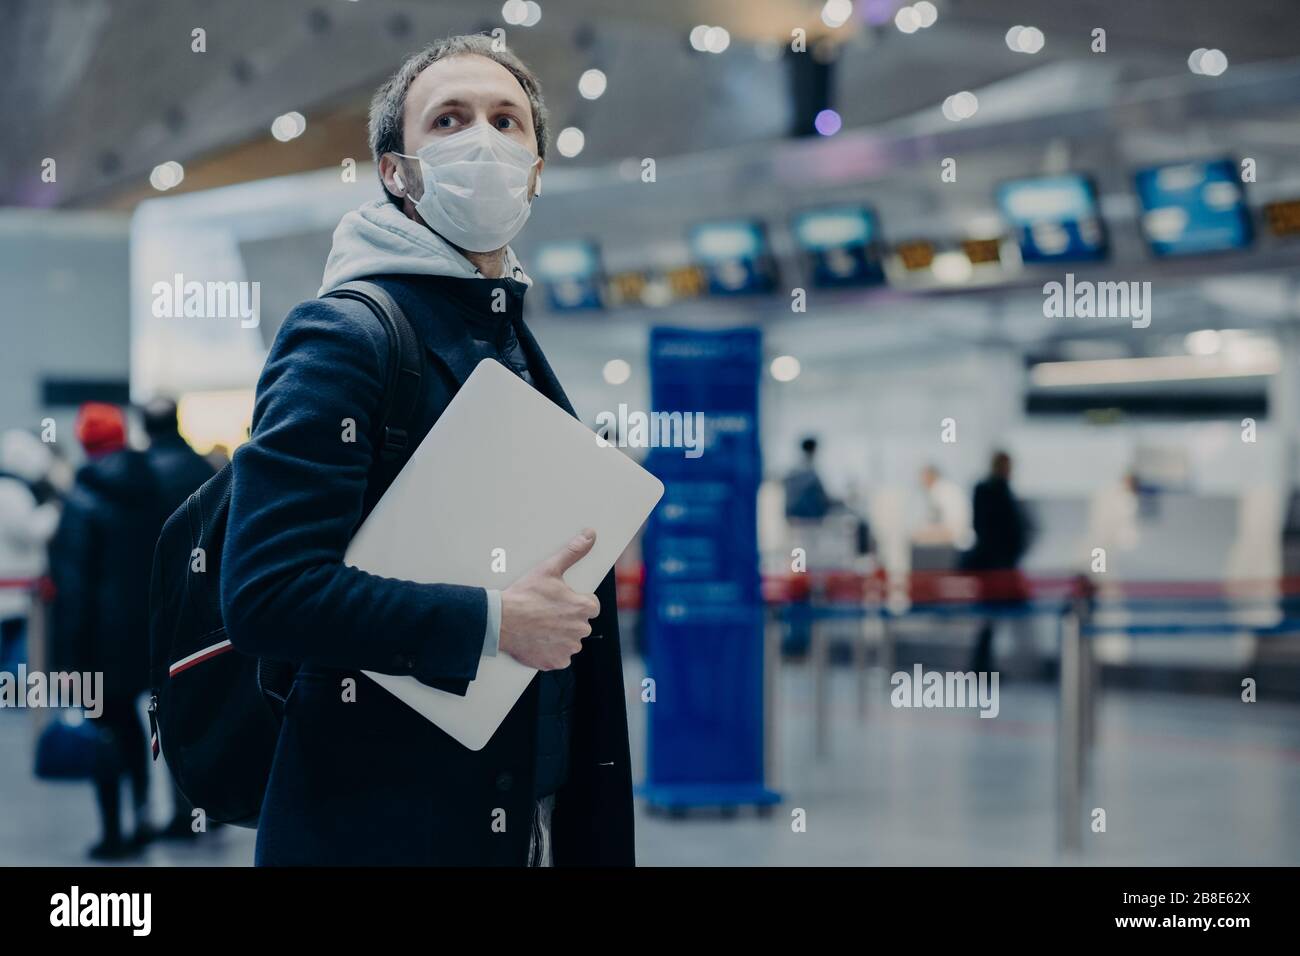 Man traveler wears protective disposable medical mask in airport, returns from abroad where coronavirus spreading, carries backpack, takes care of hea Stock Photo